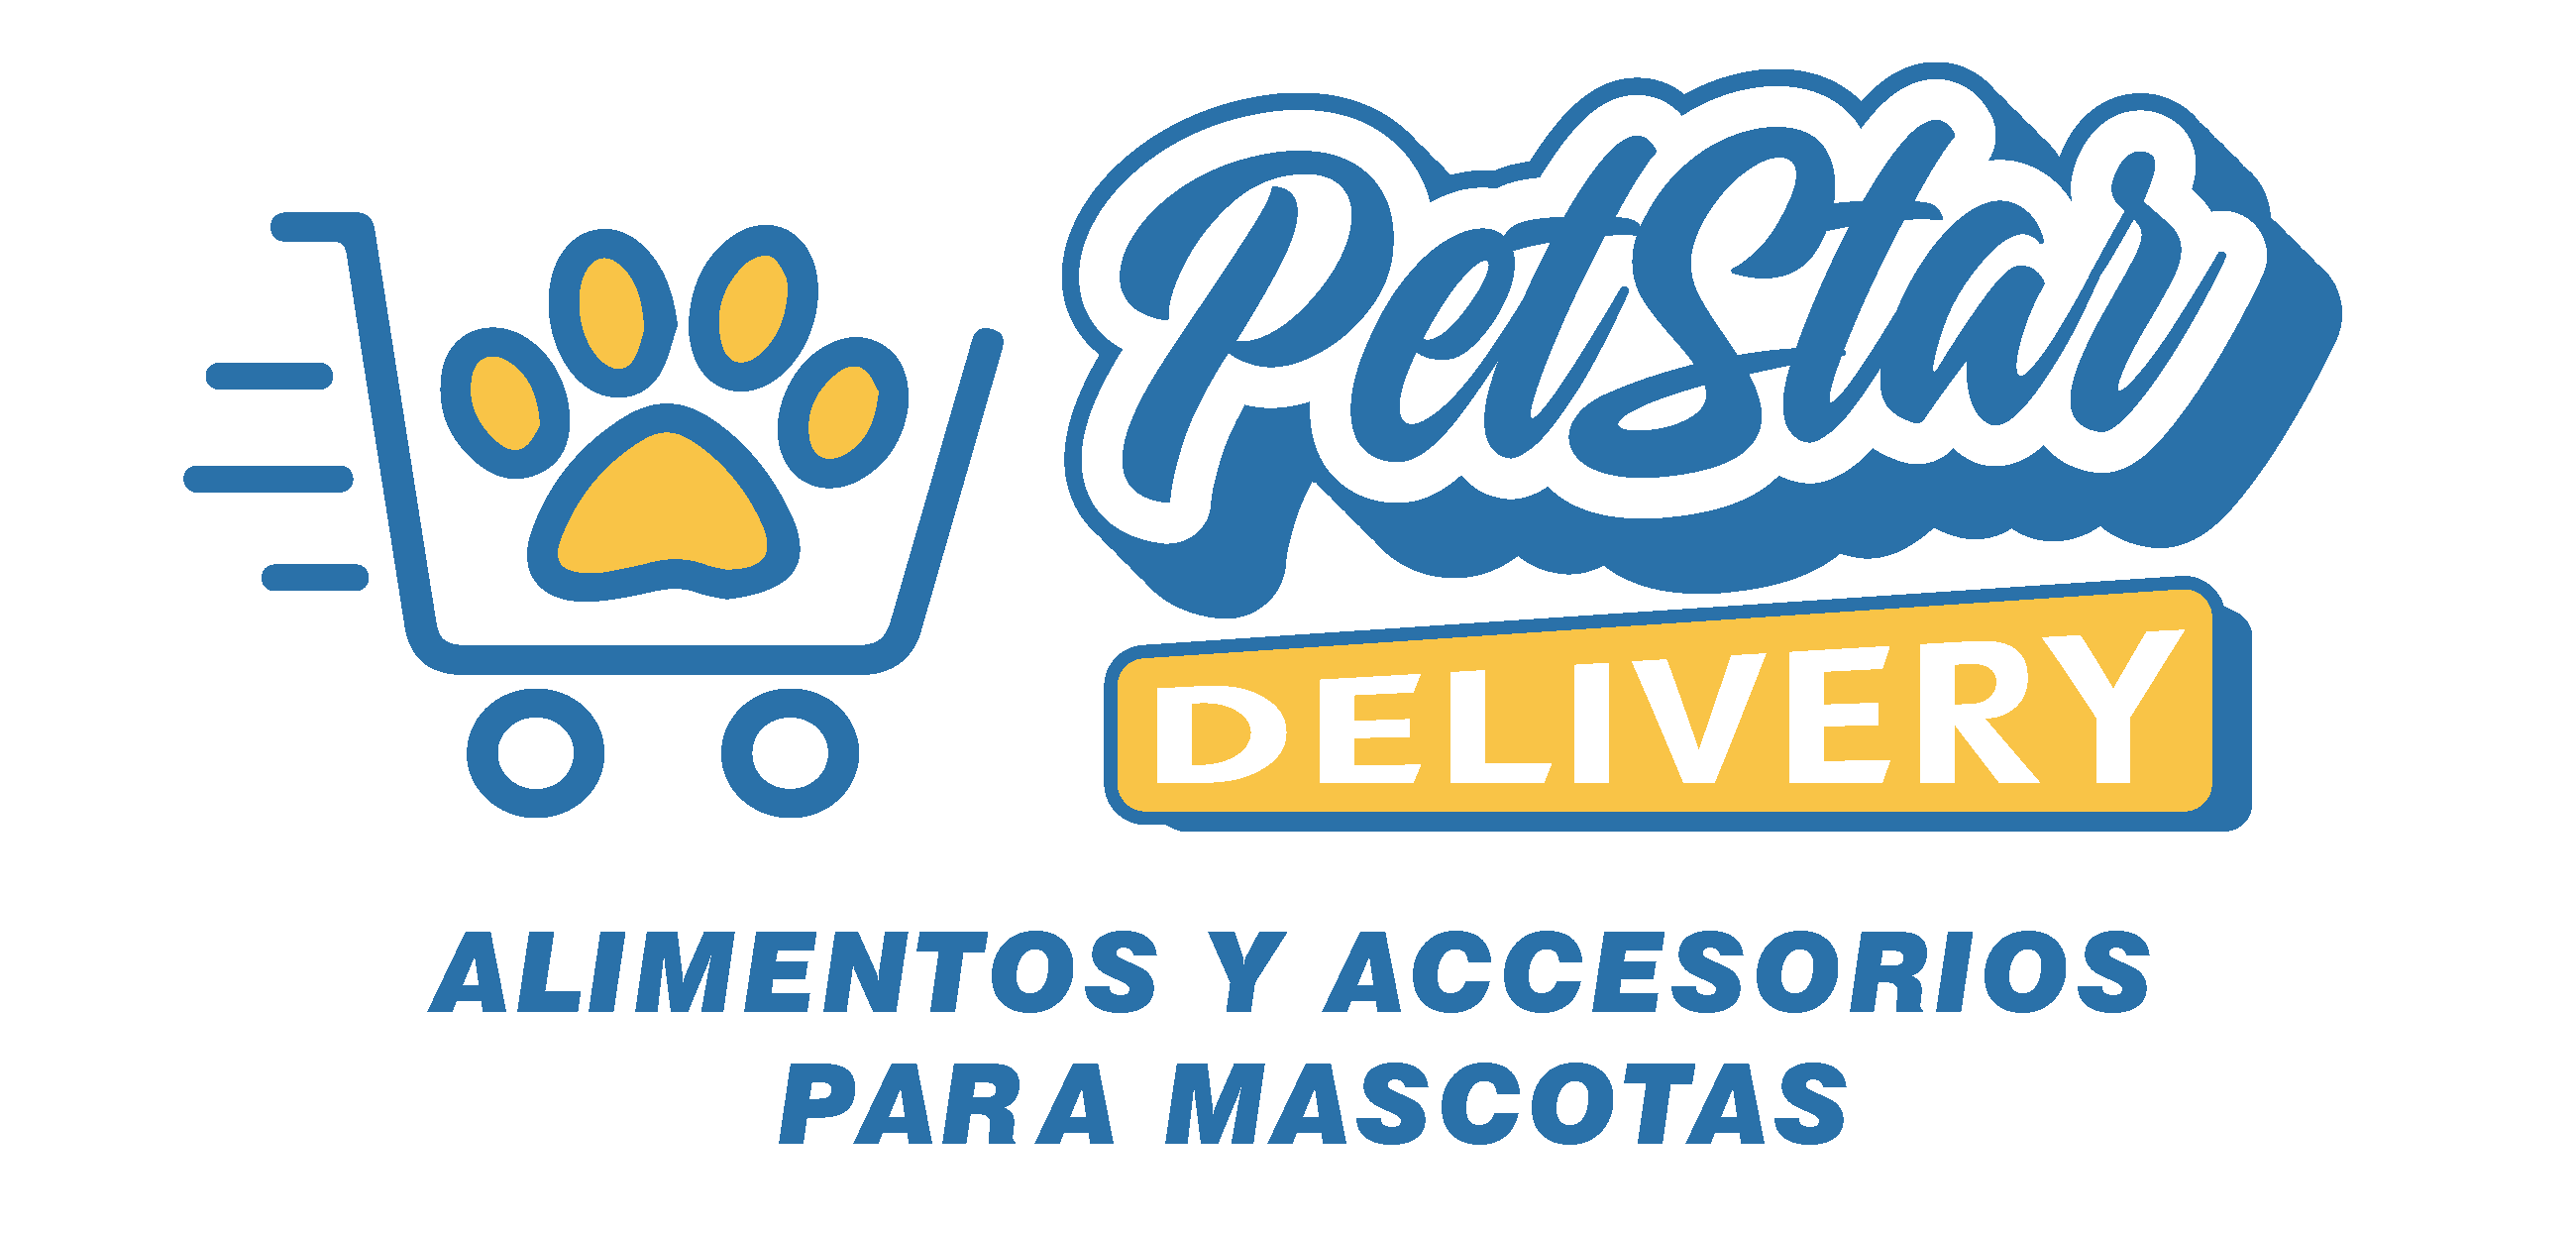 Pet Star Delivery